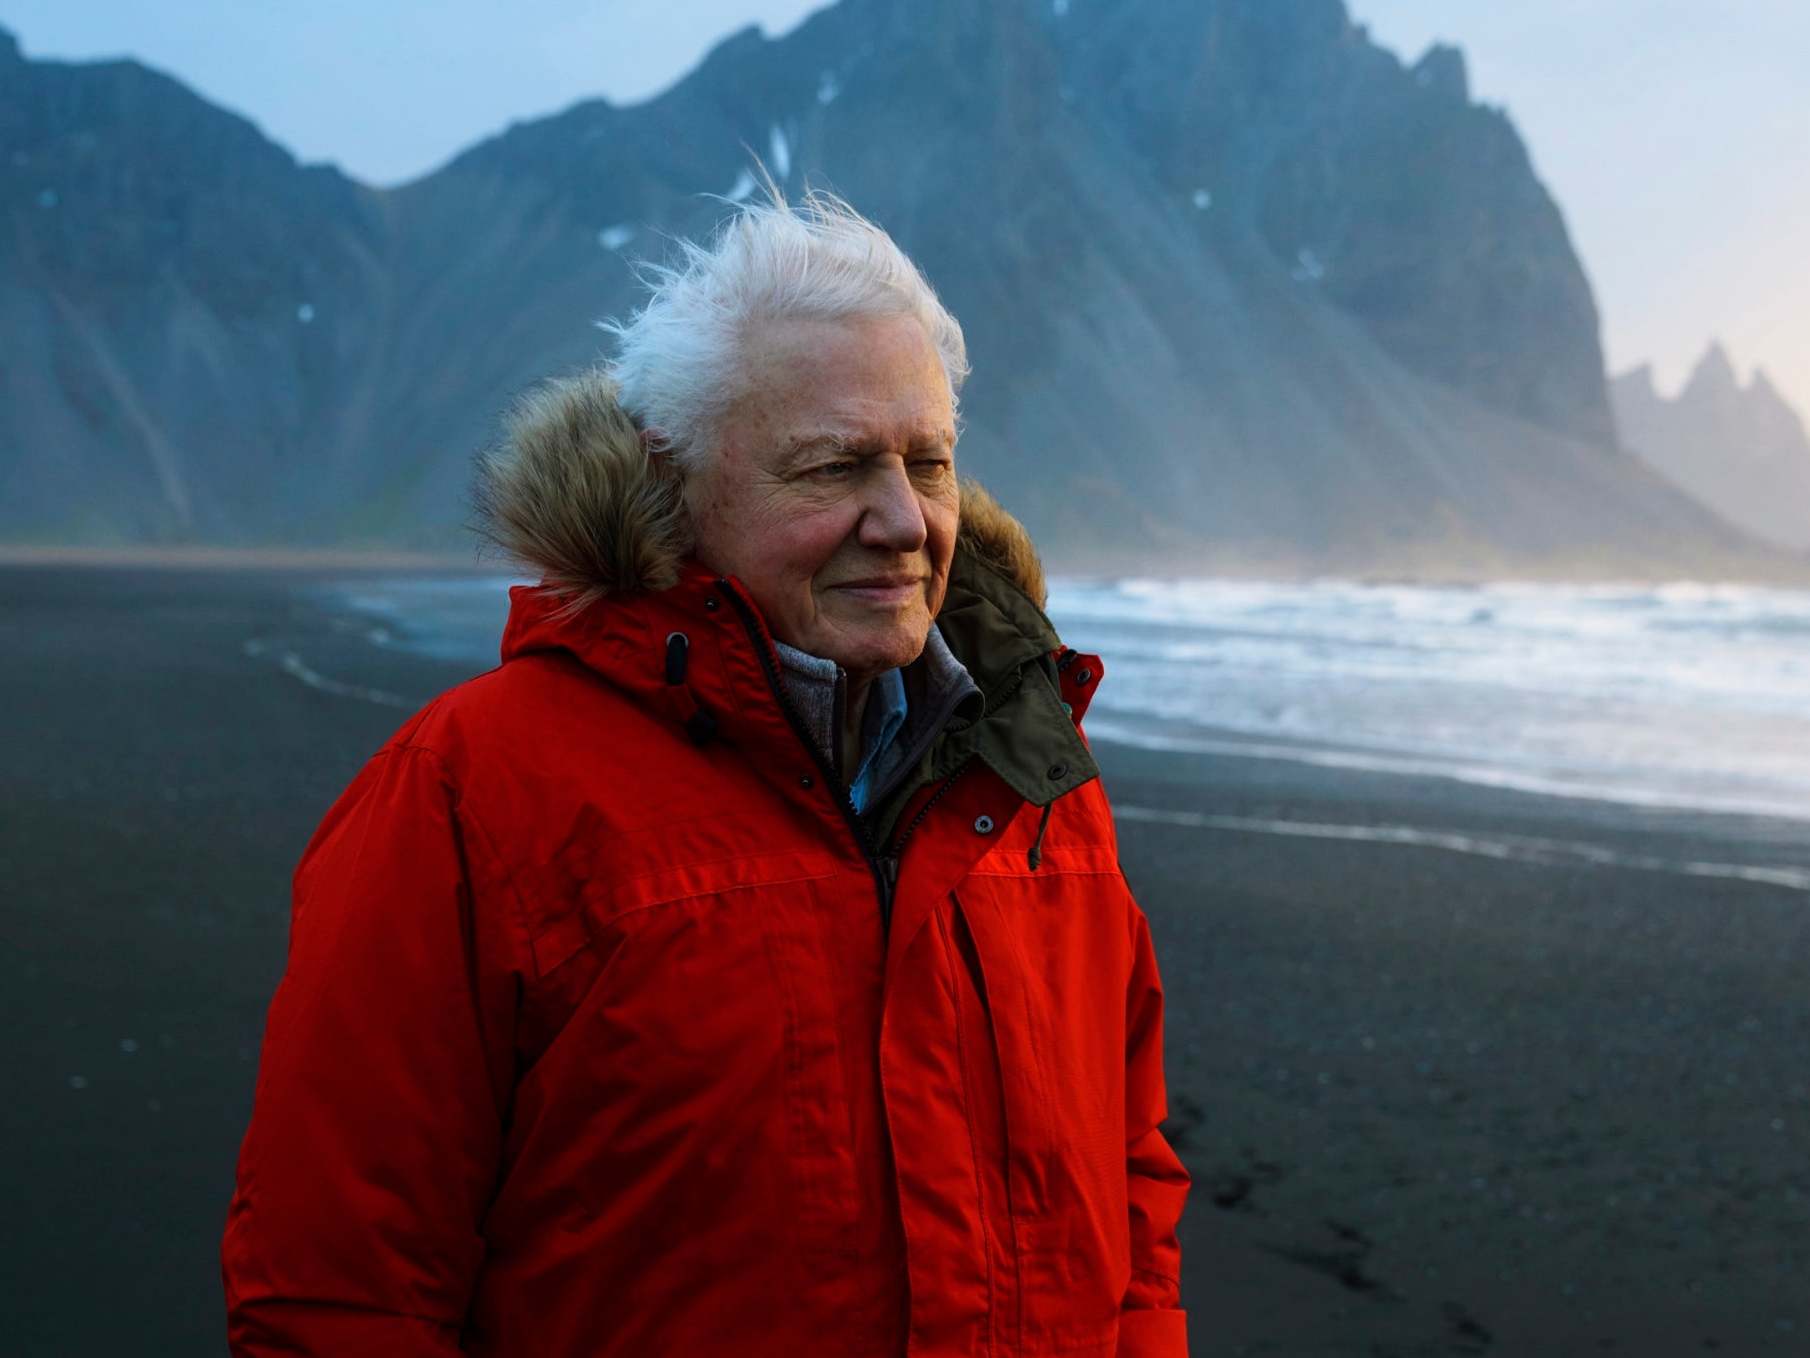 David Attenborough’s work has been credited with creating greater awareness about the climate crisis (BBC)